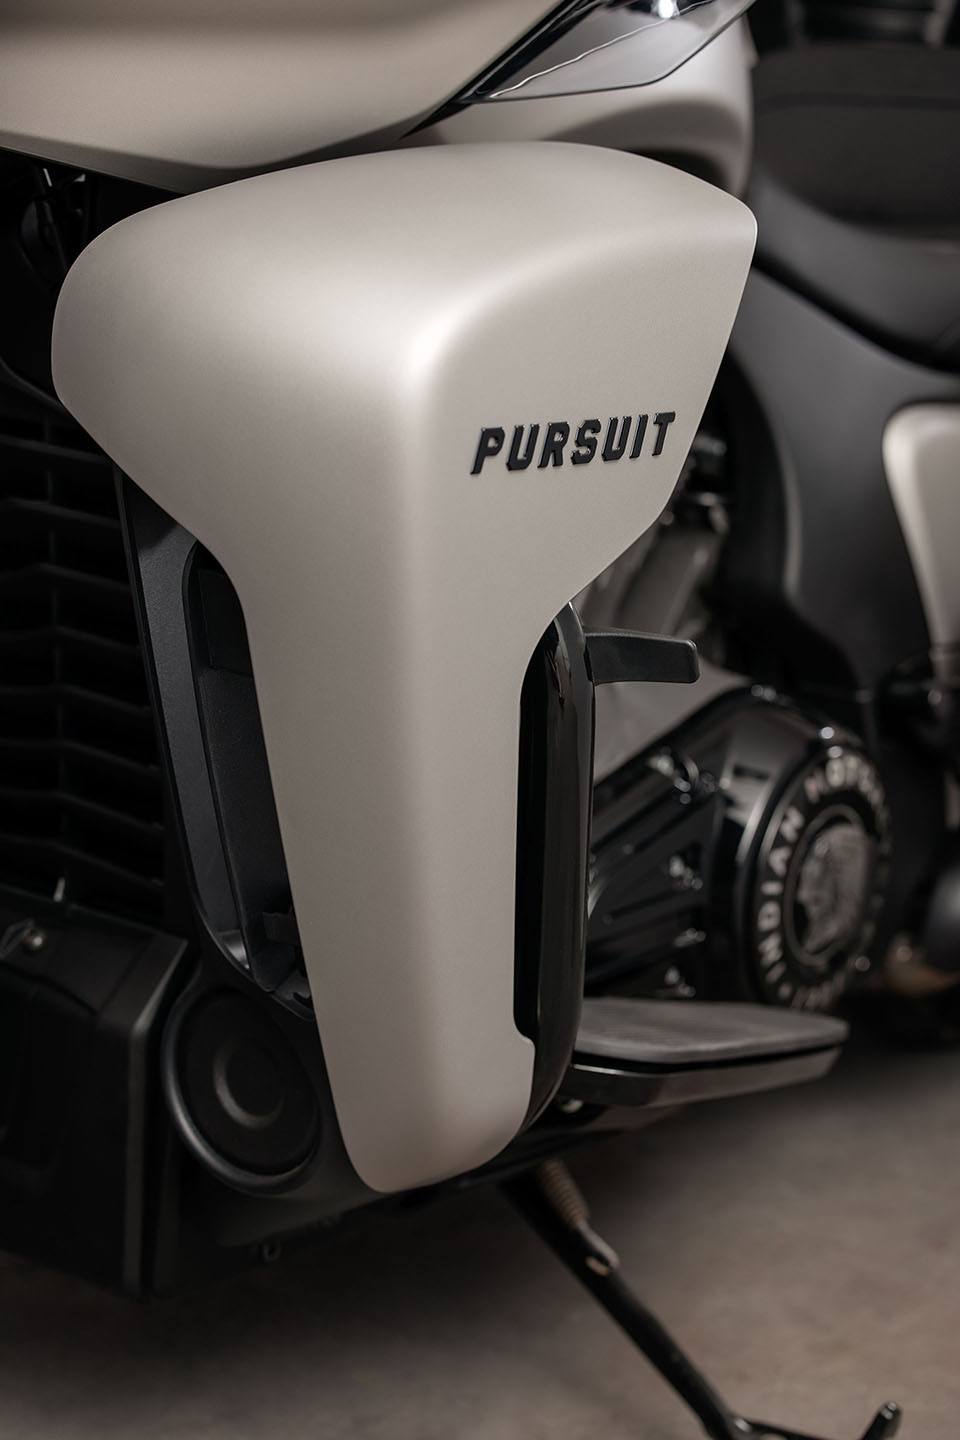 2022 Indian Motorcycle Pursuit® Dark Horse® with Premium Package in San Diego, California - Photo 13